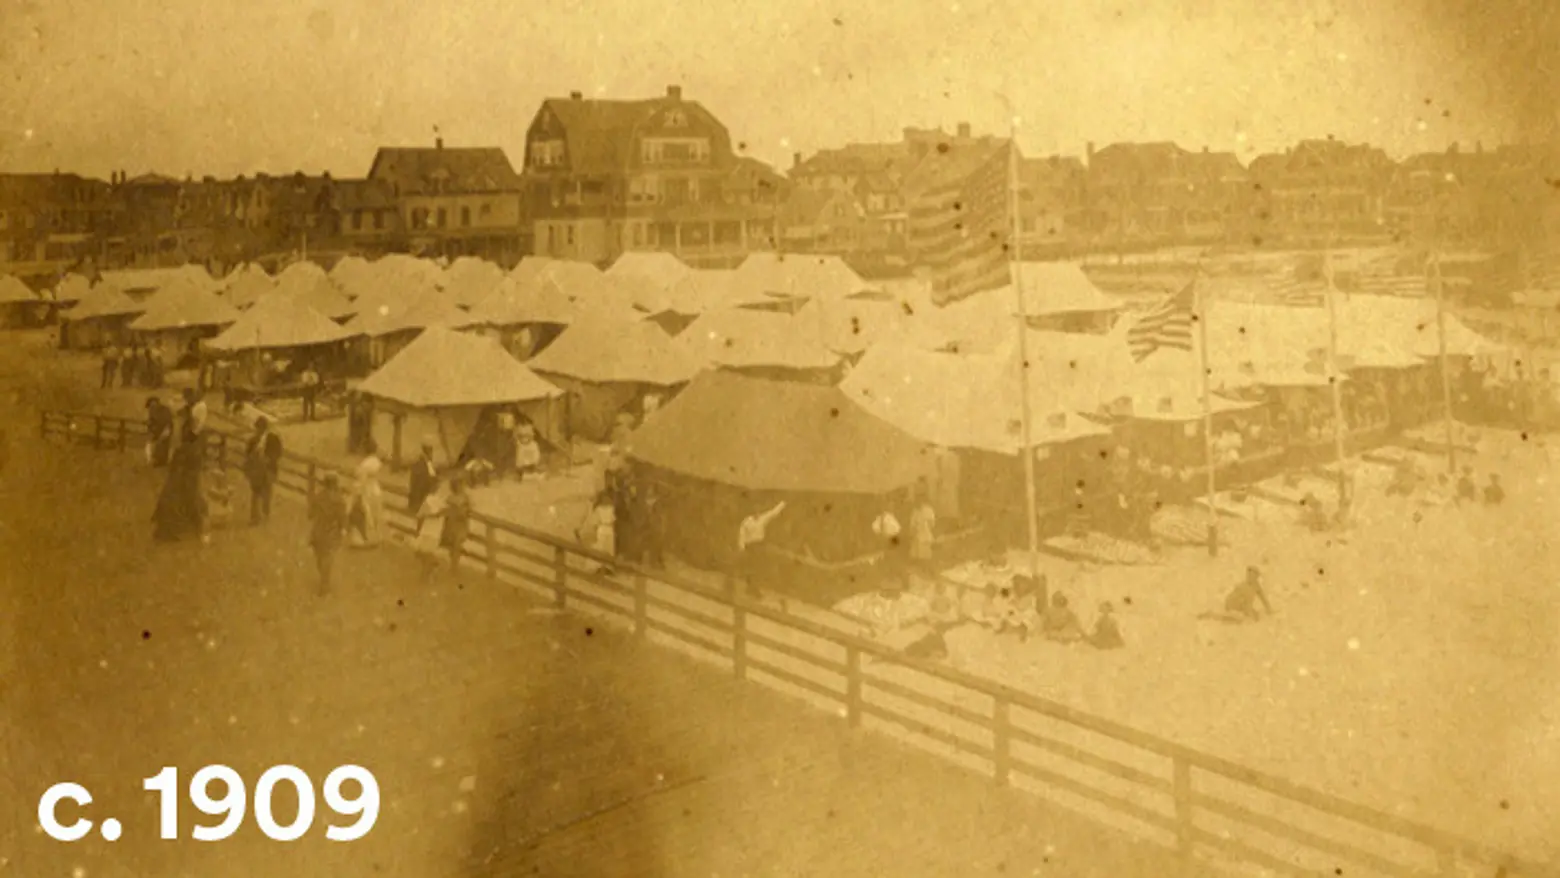 camping at the rockaways in queens early 1900s